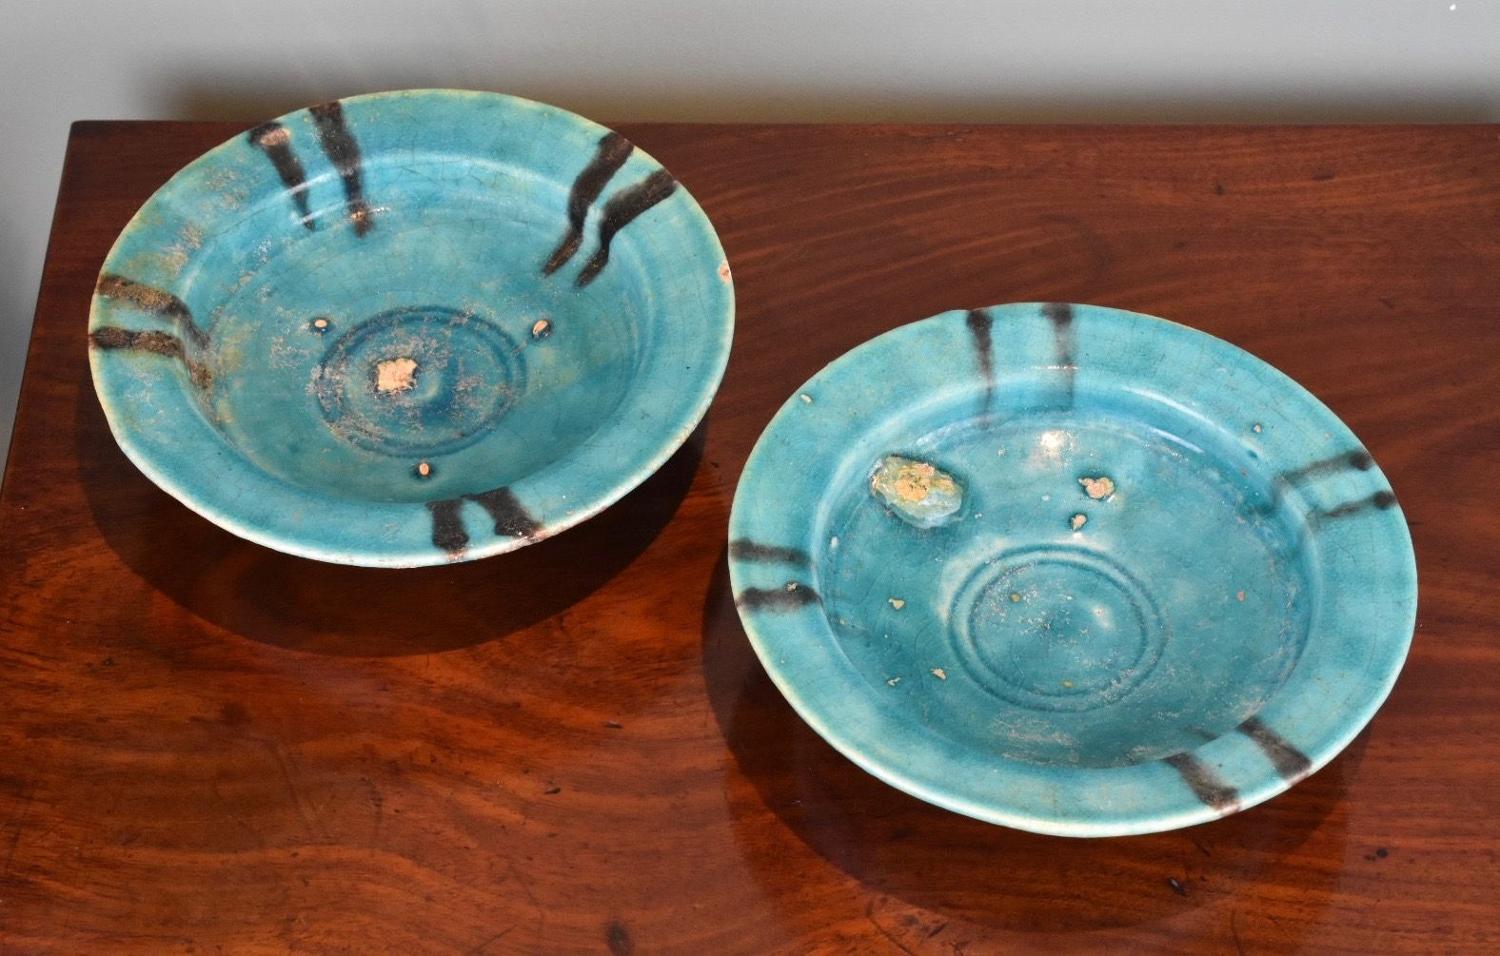 Pair of 12th century Persian dishes